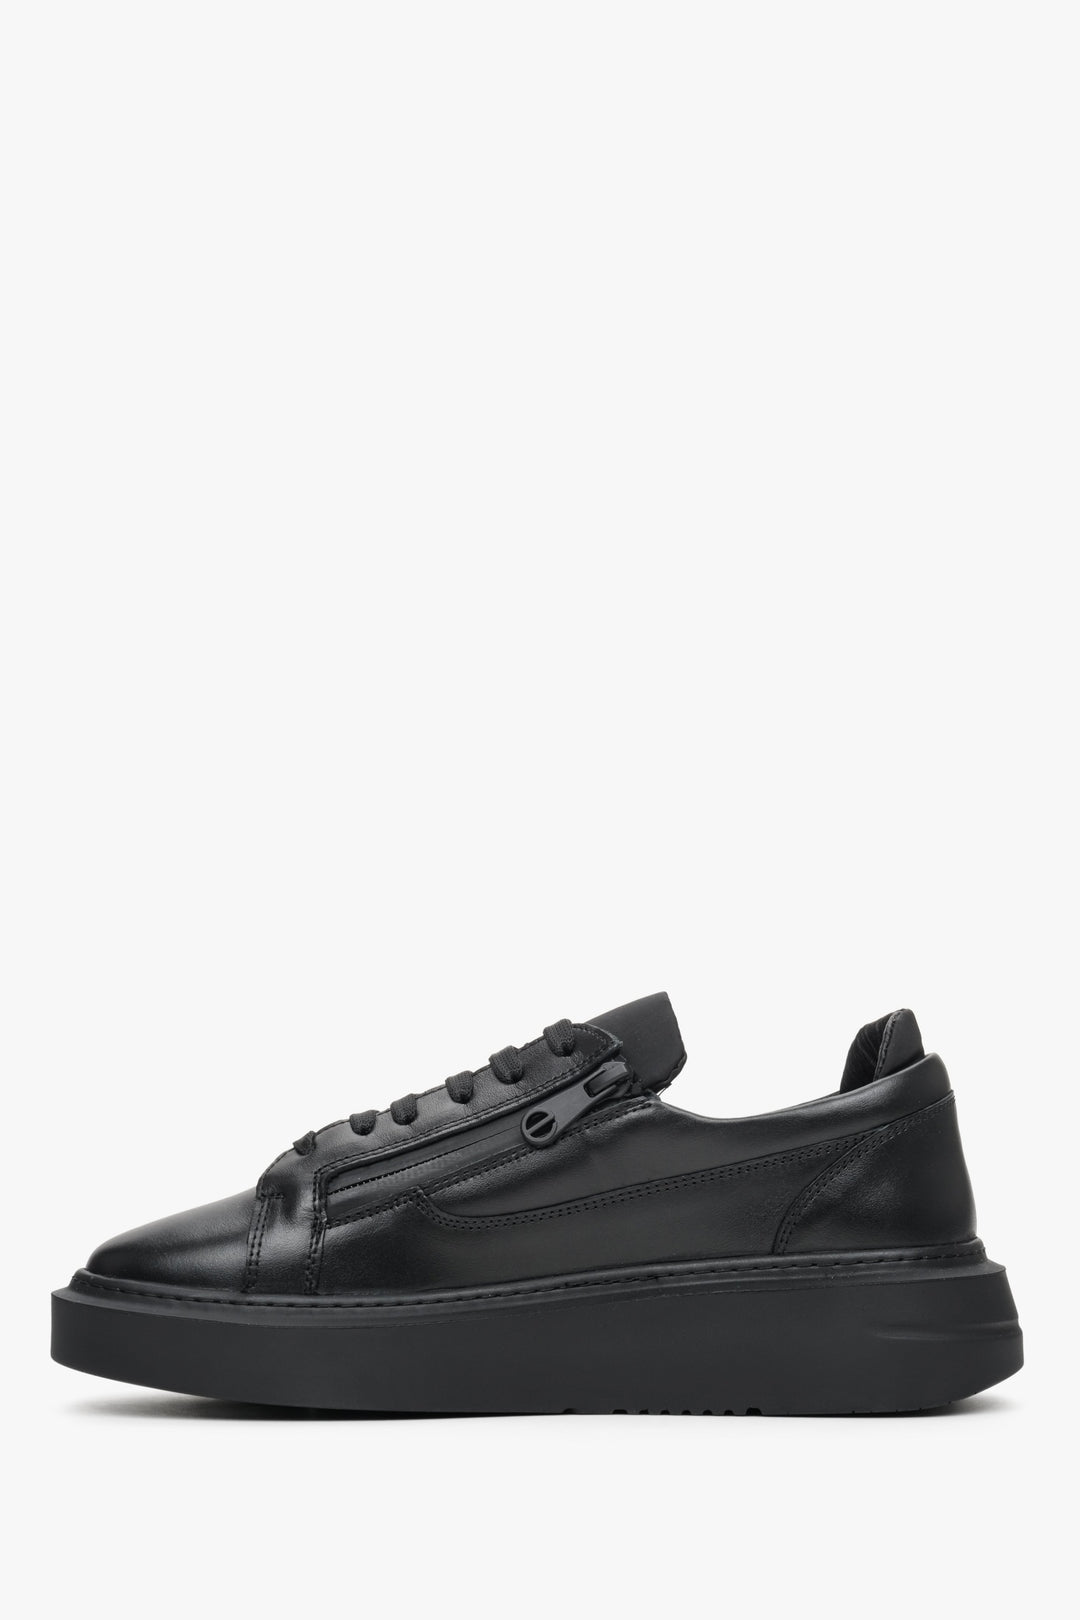 Women's black leather sneakers by Estro with a decorative zipper for spring - shoe profile.